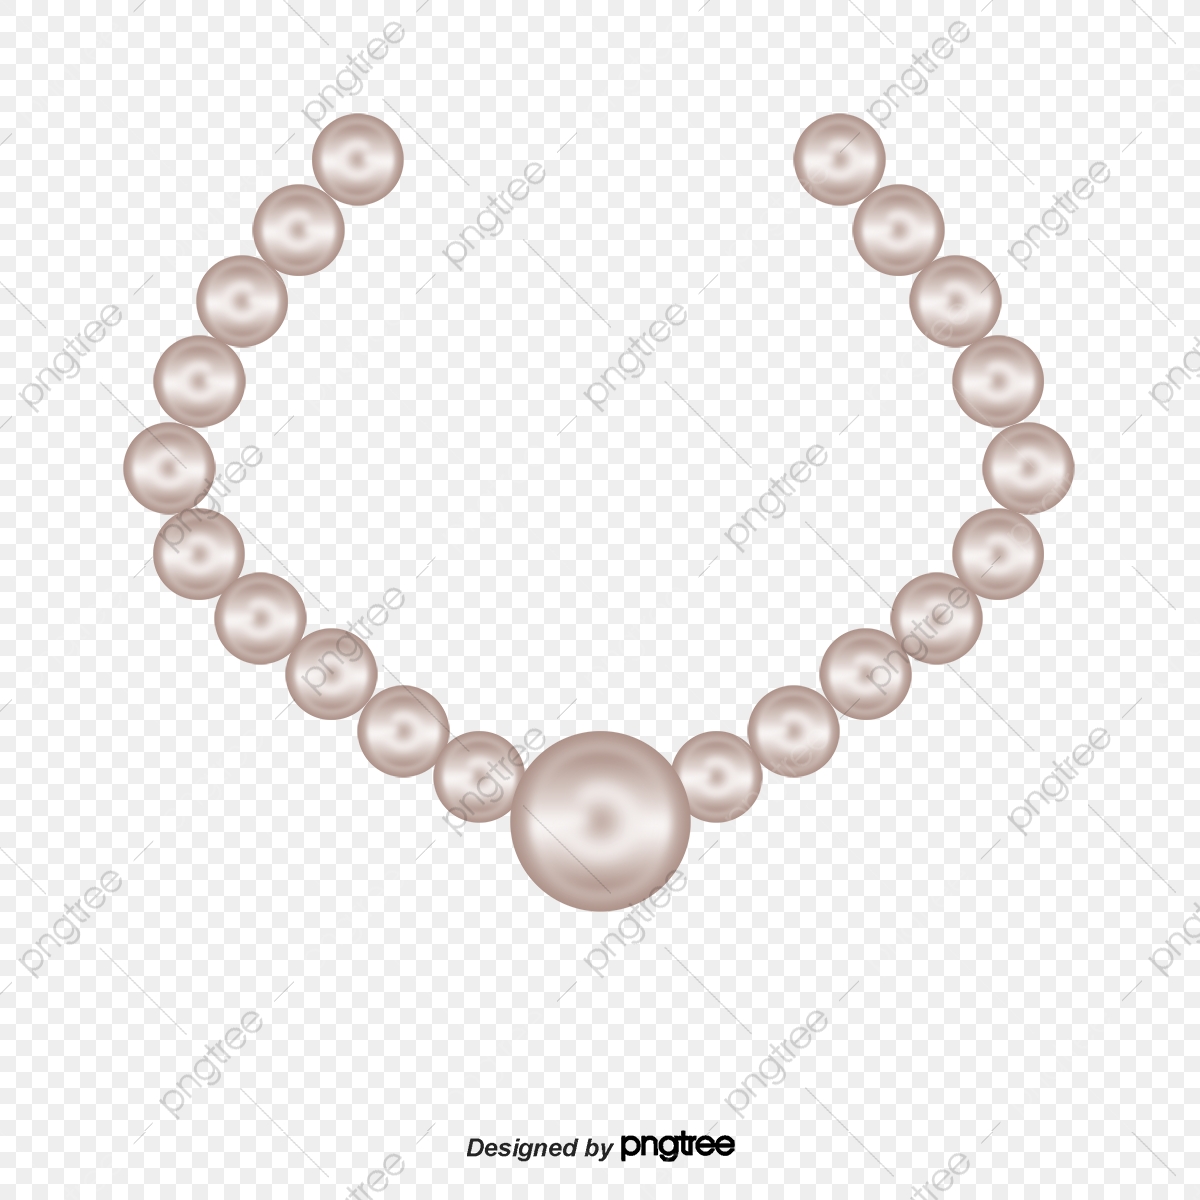 Pearl jewelry bead png. Pearls clipart file